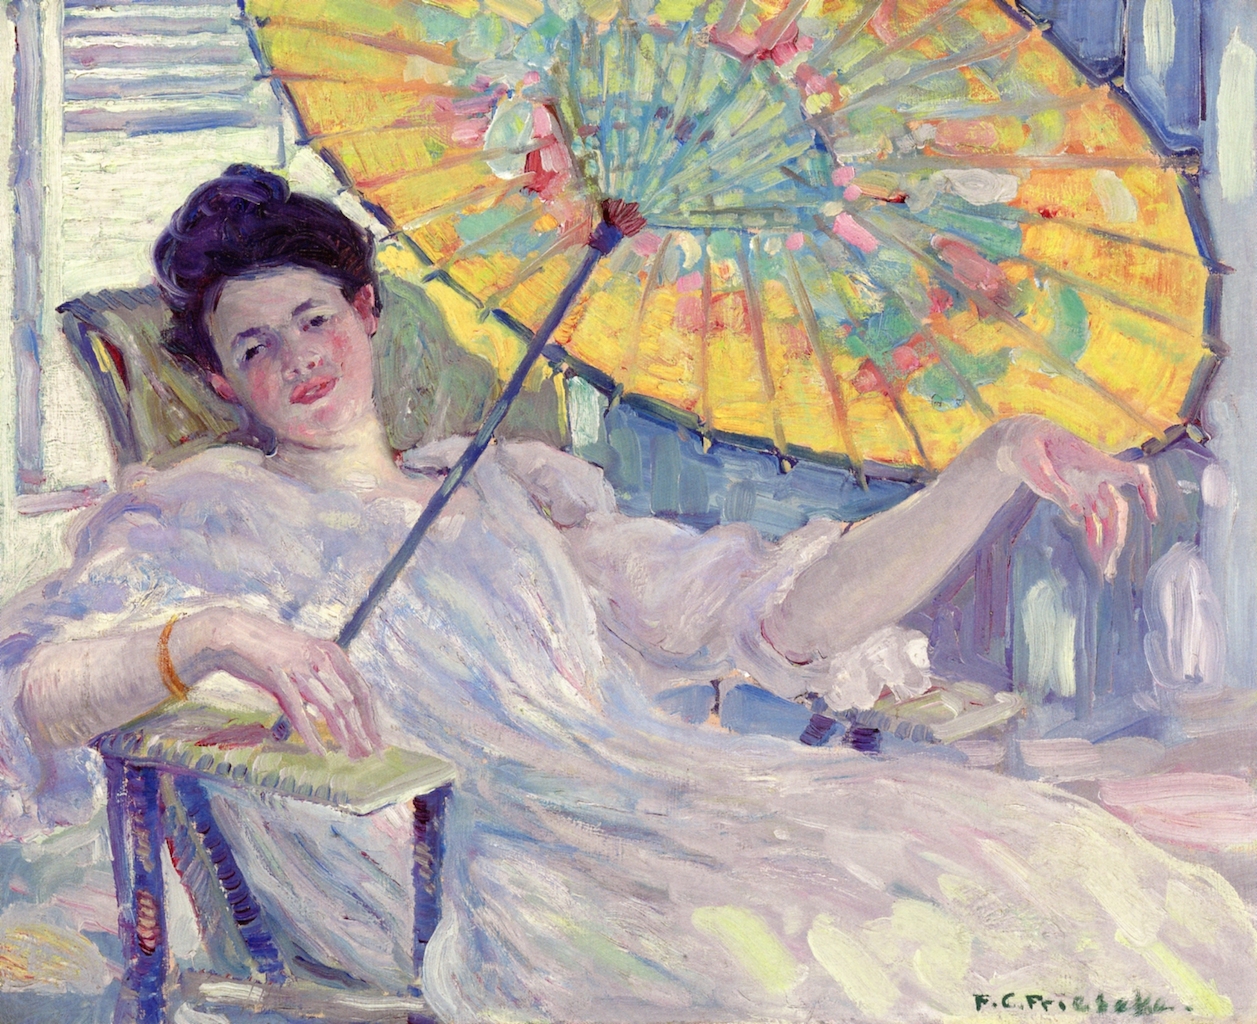 Woman with Parasol by Frederick Carl Frieseke, c. 1912